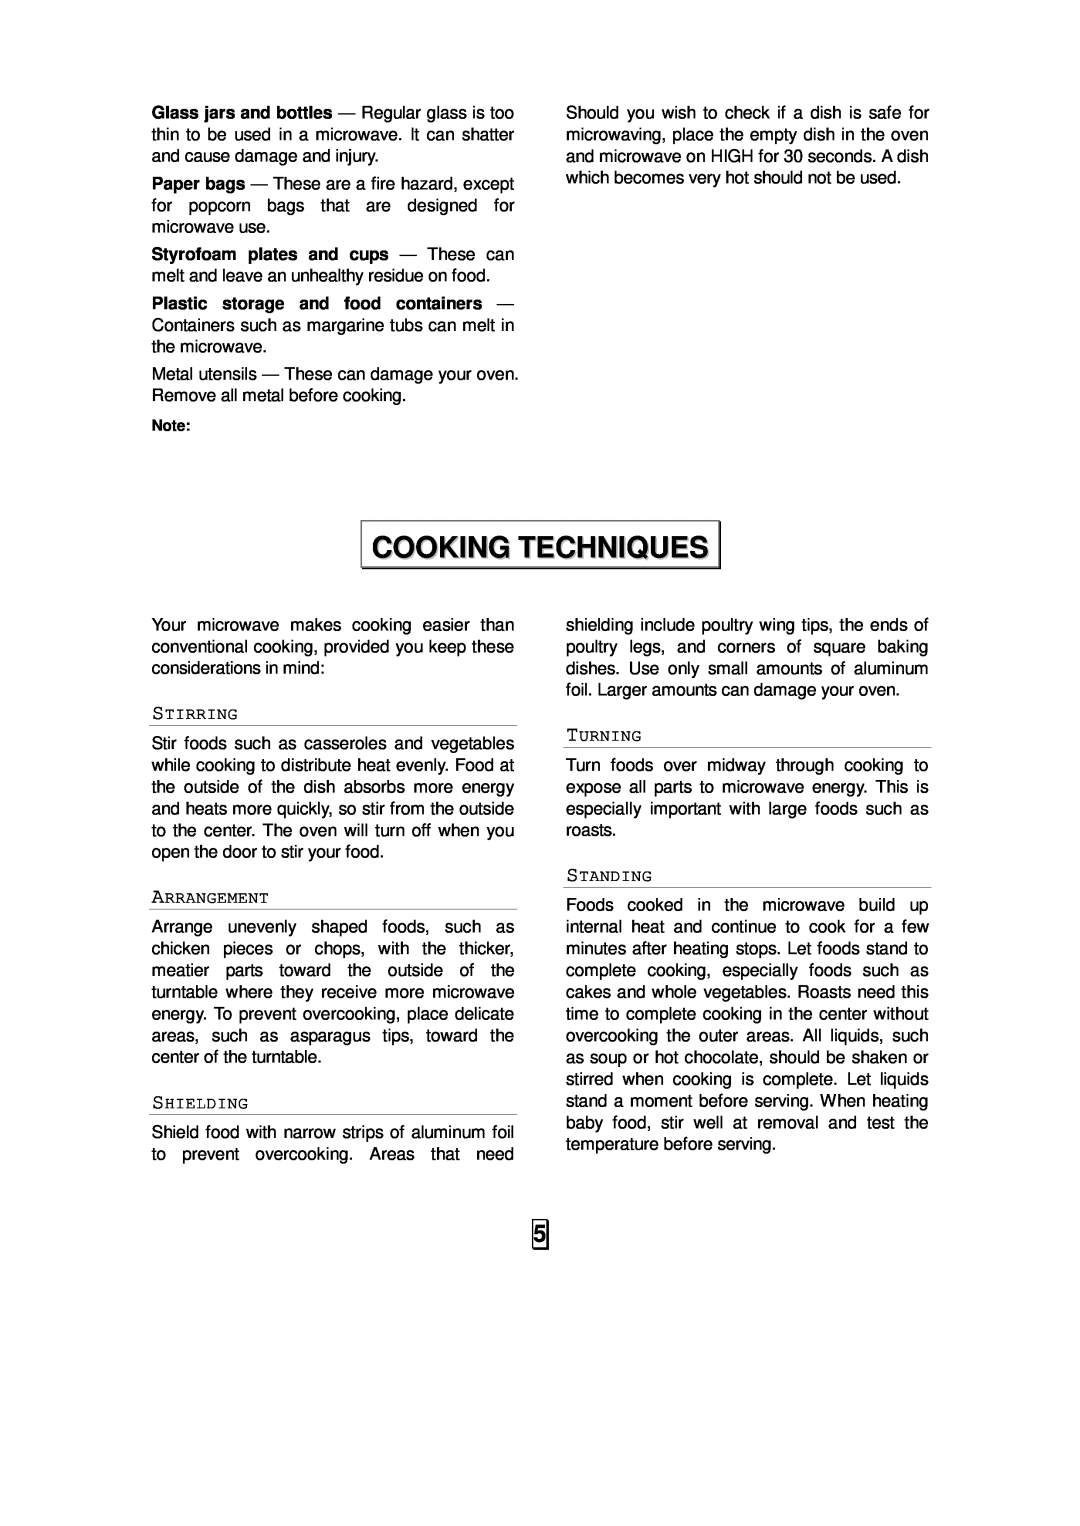 Sunbeam SMW992 owner manual Cooking Techniques, Stirring, Arrangement, Shielding, Turning, Standing 